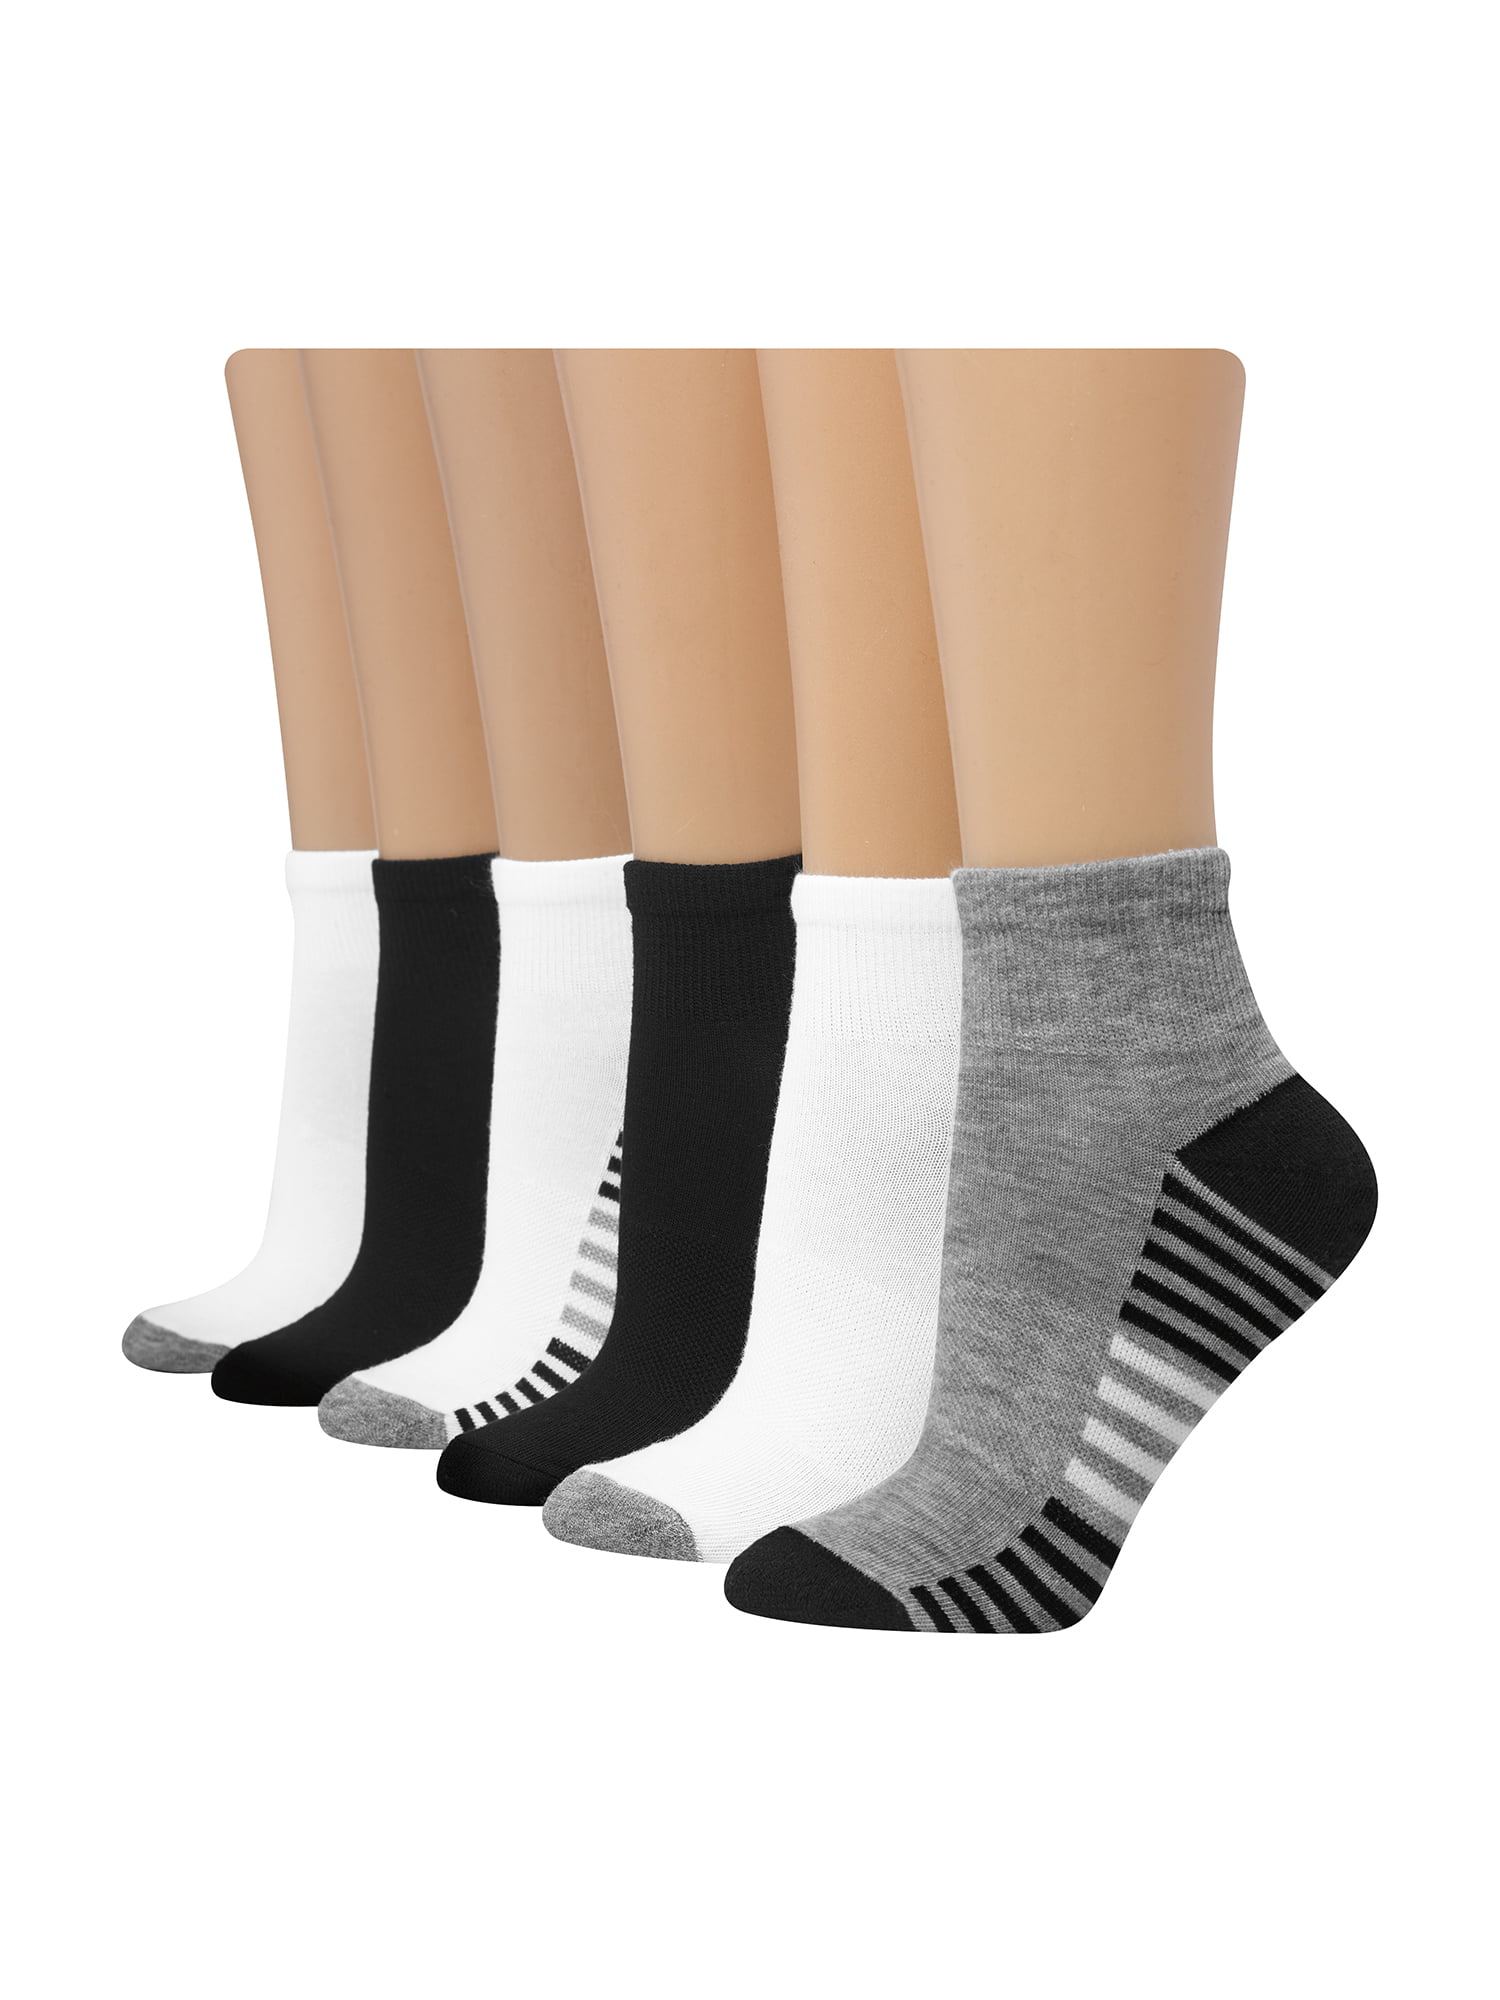 Athletic Sports Ankle/Crew Socks Cushion Stretch Cotton Casual Non-Slip Socks 6 Pack for Men Women